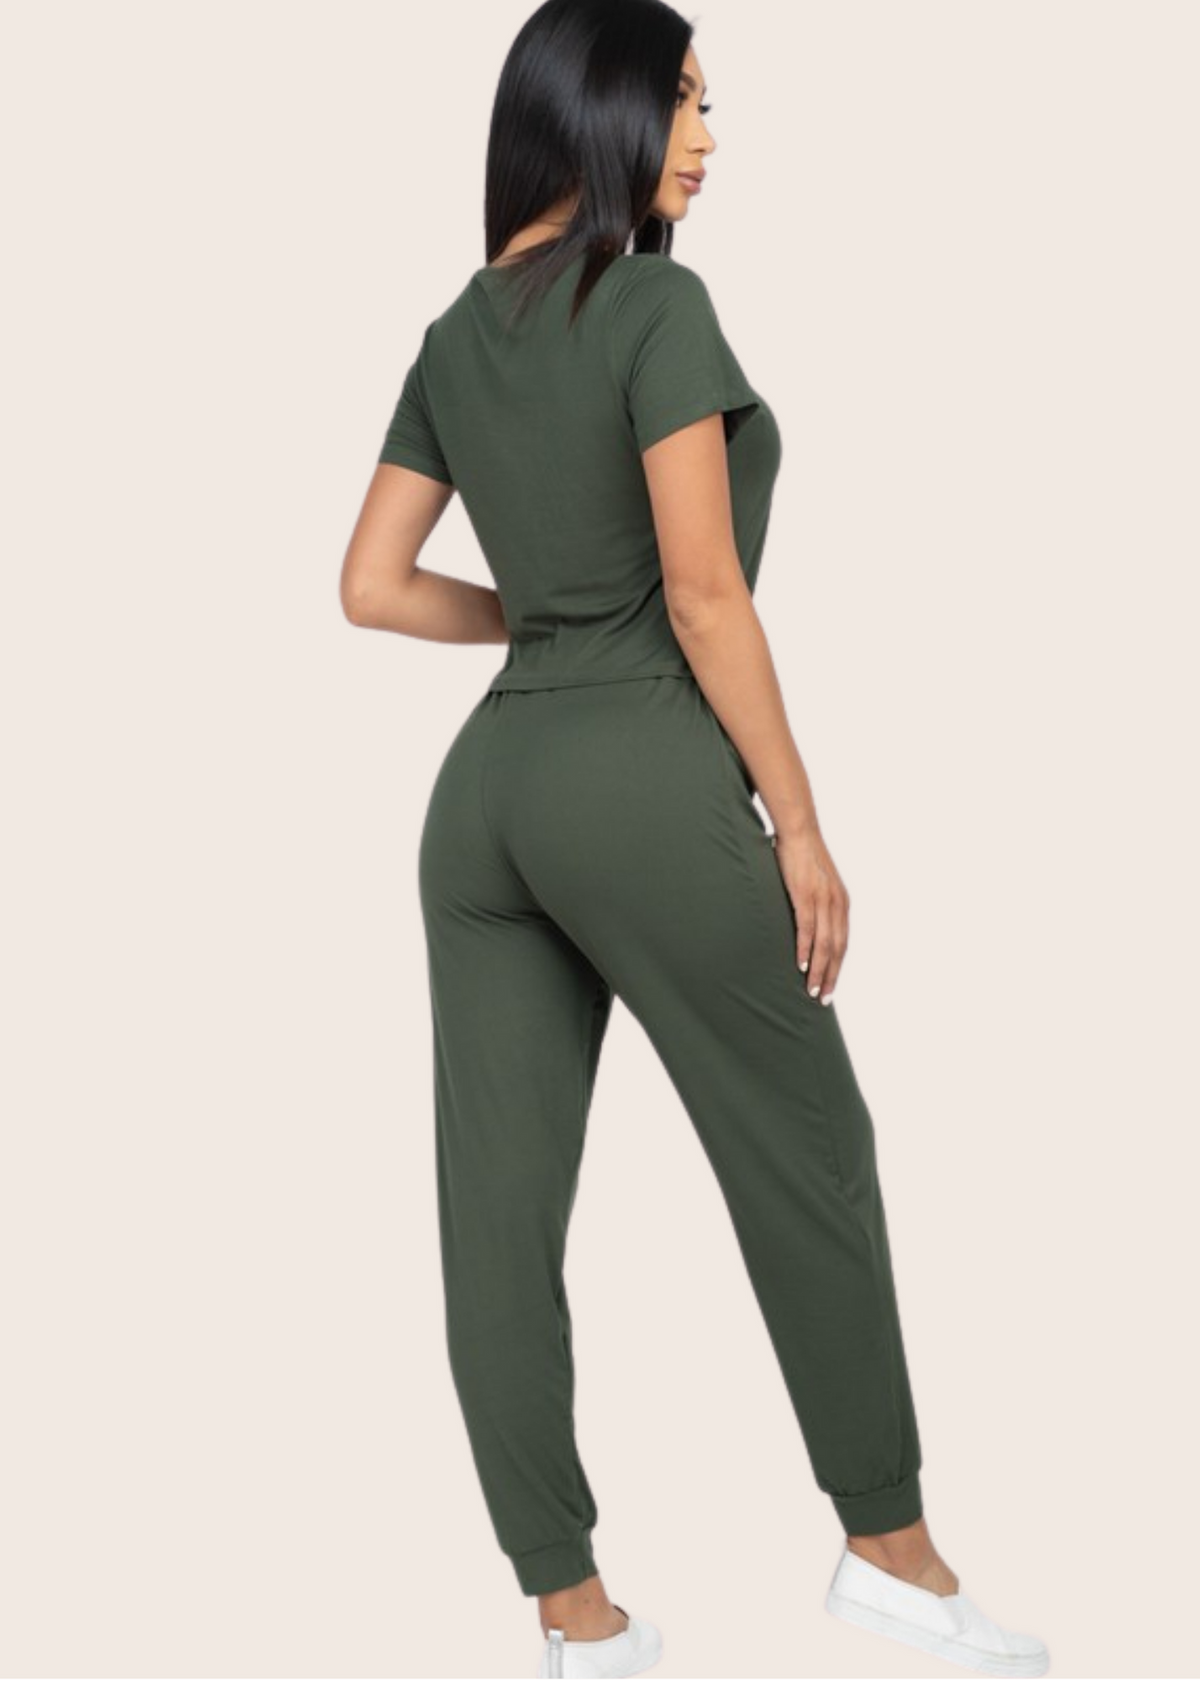 Olive Stretch Knit Short Sleeve Two-Piece Athletic Set